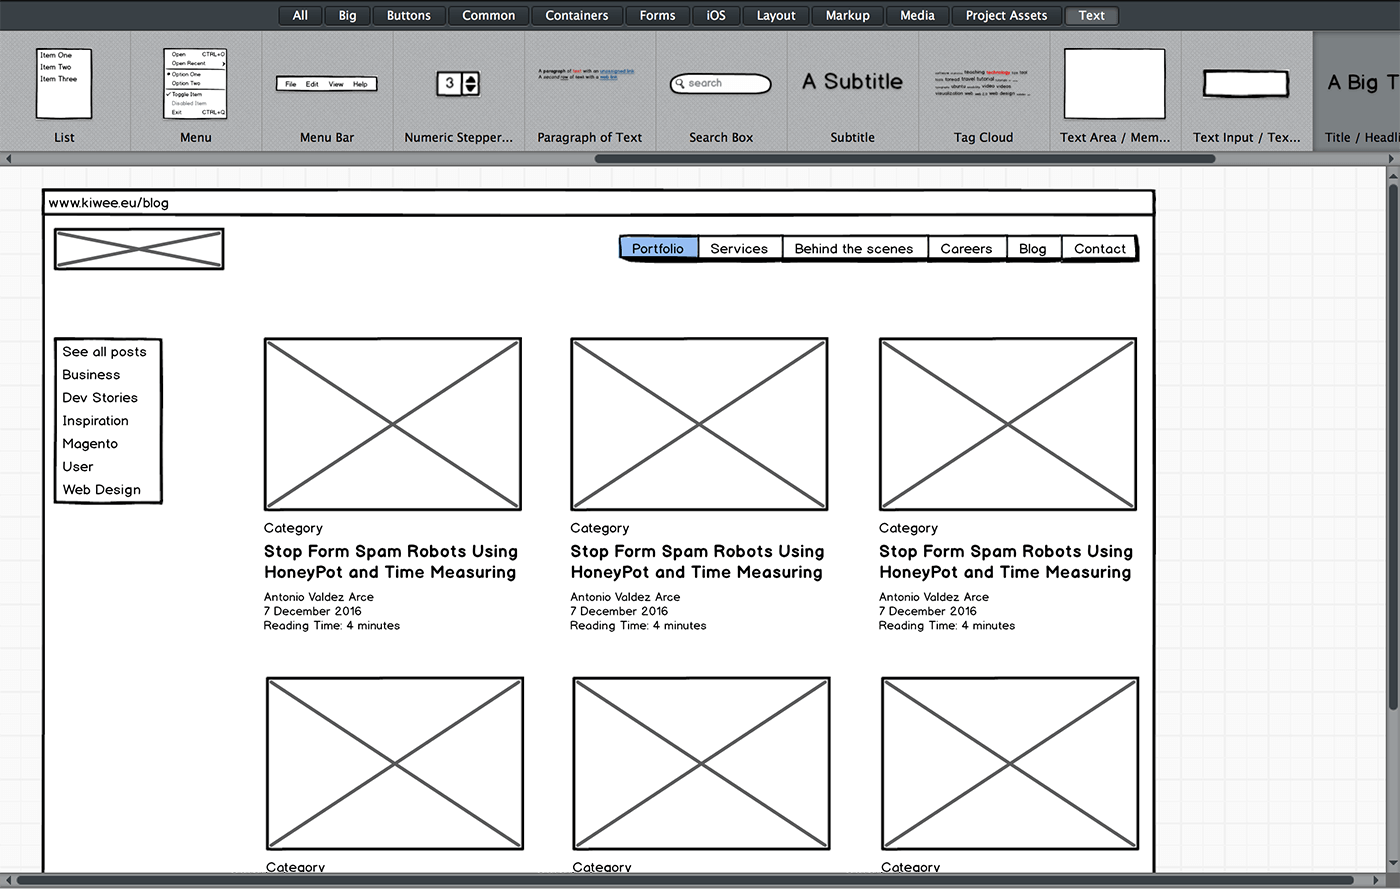 BALSAMIQ interface with tabs regarding Portfolio, Services, Behind the scenes, Careers, Blog and Contact. Below them are boxes with posts with their titles below them